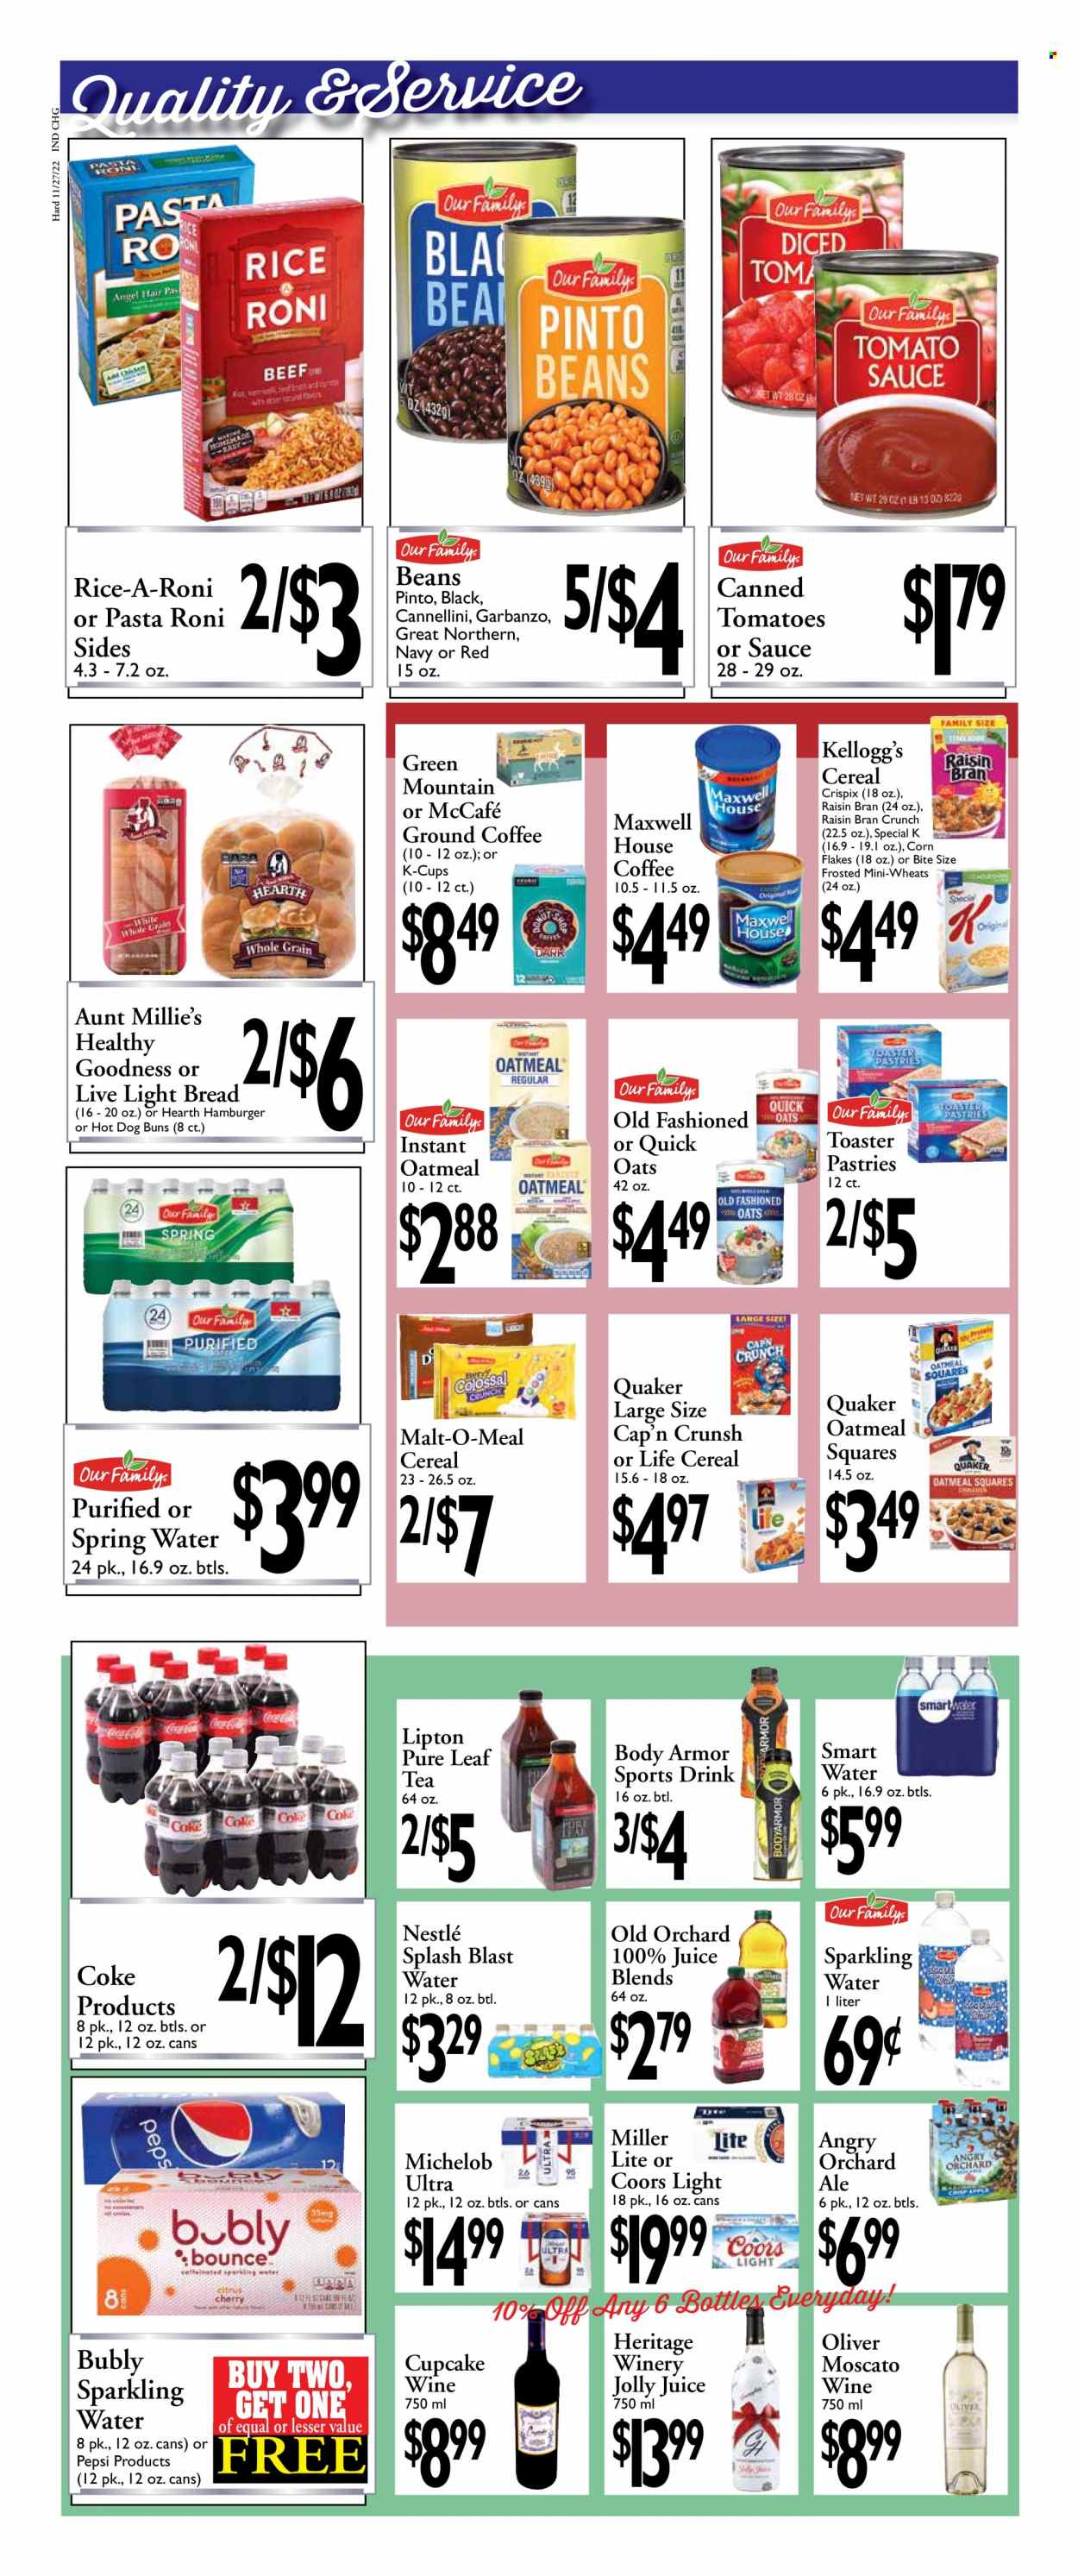 thumbnail - Harding's Markets Flyer - 11/27/2022 - 12/10/2022 - Sales products - bread, buns, Quaker, Nestlé, Kellogg's, oatmeal, oats, malt, cereals, corn flakes, Quick Oats, Raisin Bran, rice, Coca-Cola, Pepsi, juice, Body Armor, Lipton, spring water, sparkling water, Smartwater, Maxwell House, tea, Pure Leaf, coffee, ground coffee, coffee capsules, McCafe, K-Cups, Green Mountain, Moscato, Cupcake Vineyards, beer, Miller Lite, Coors, Michelob. Page 4.